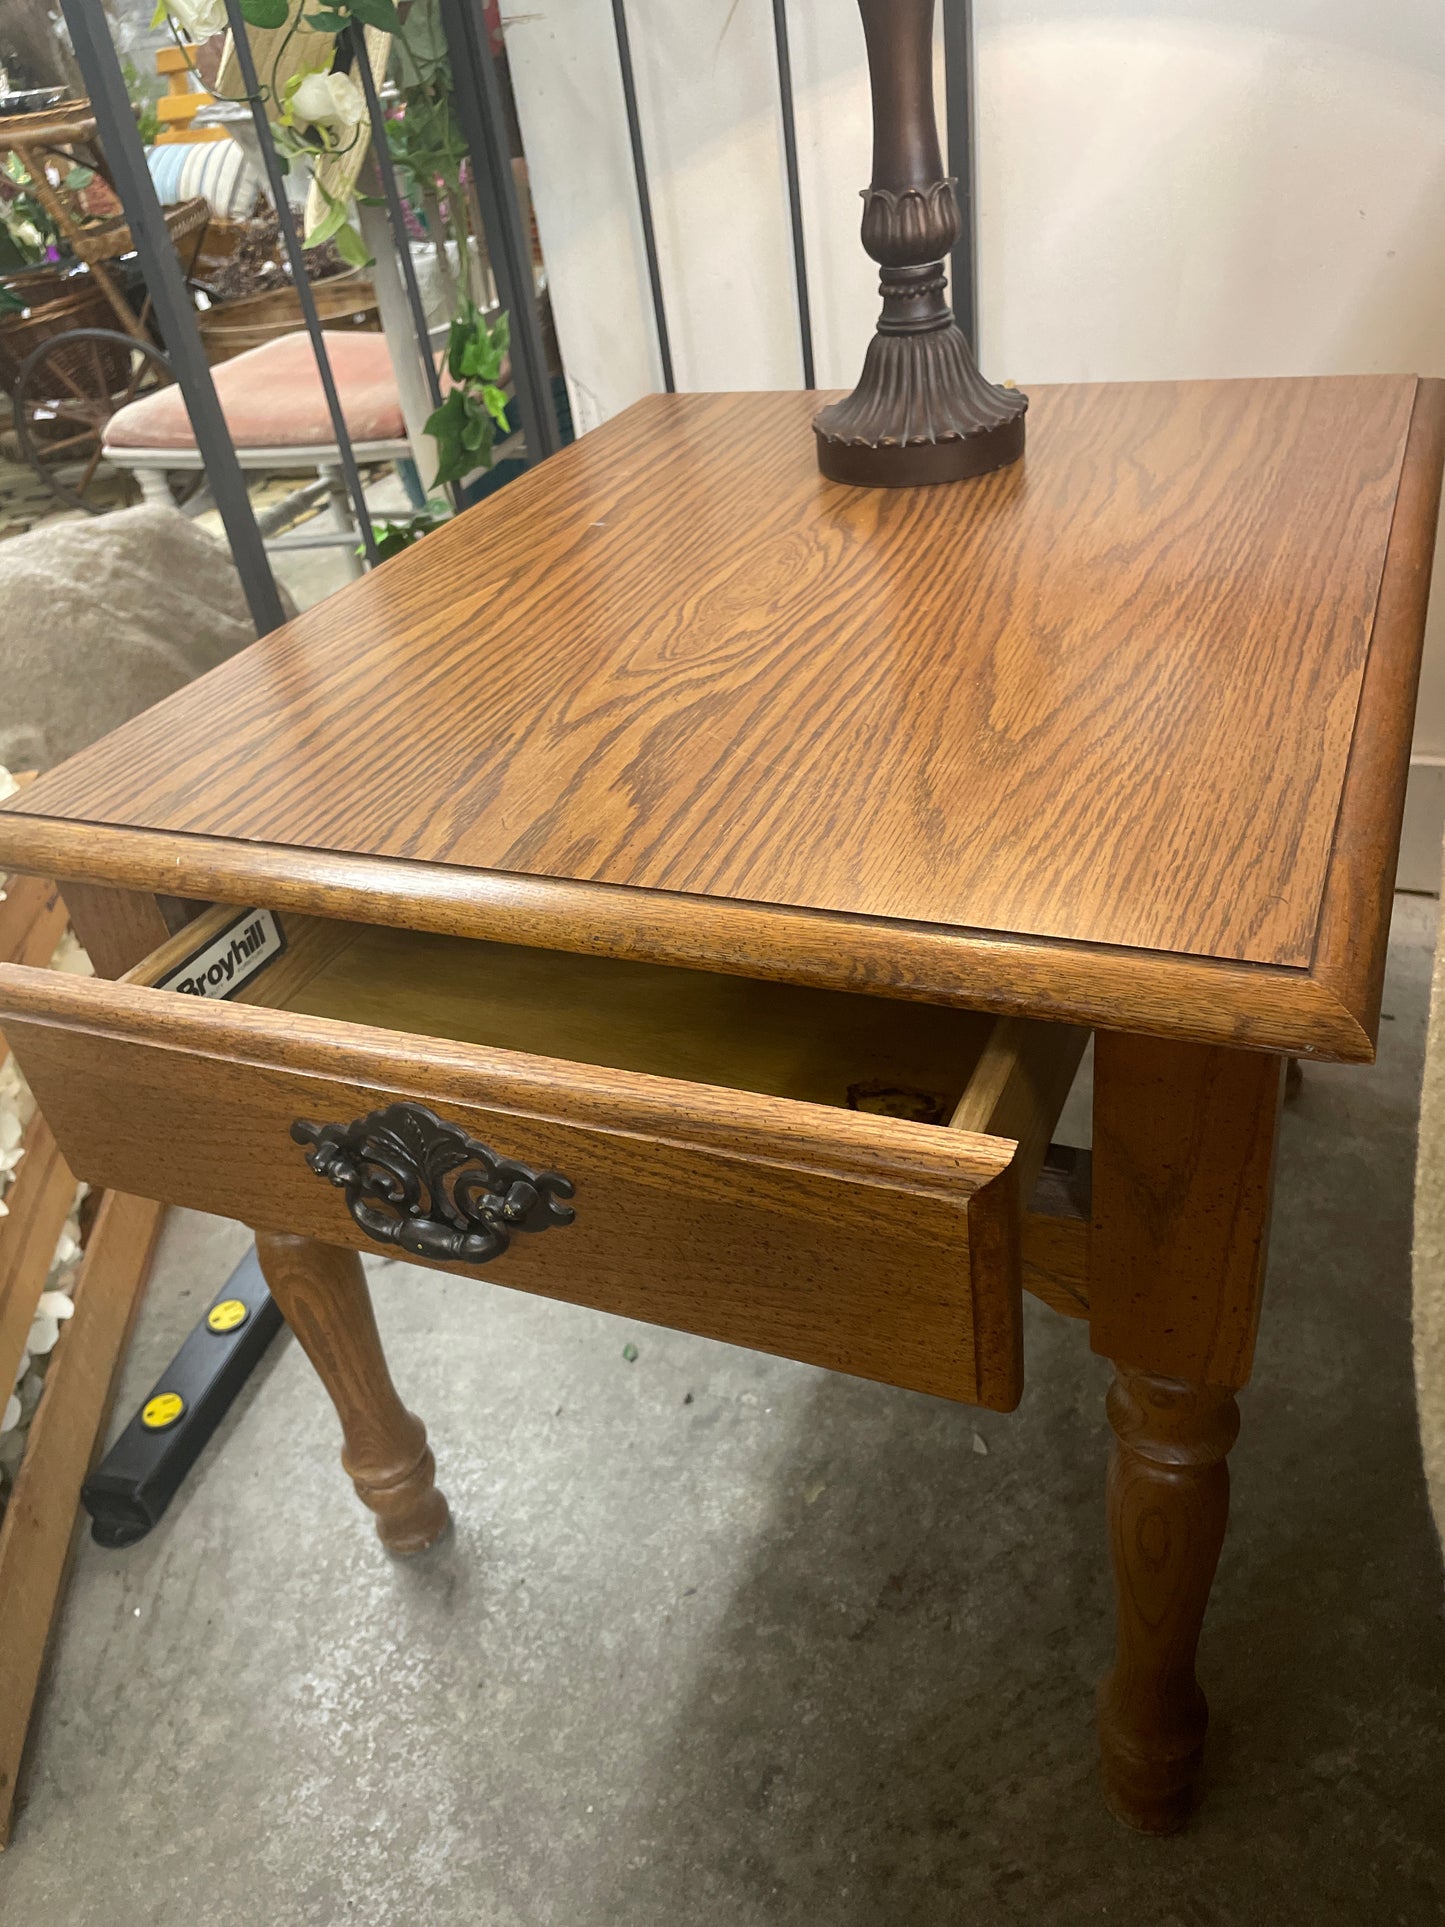 Broyhill End Table